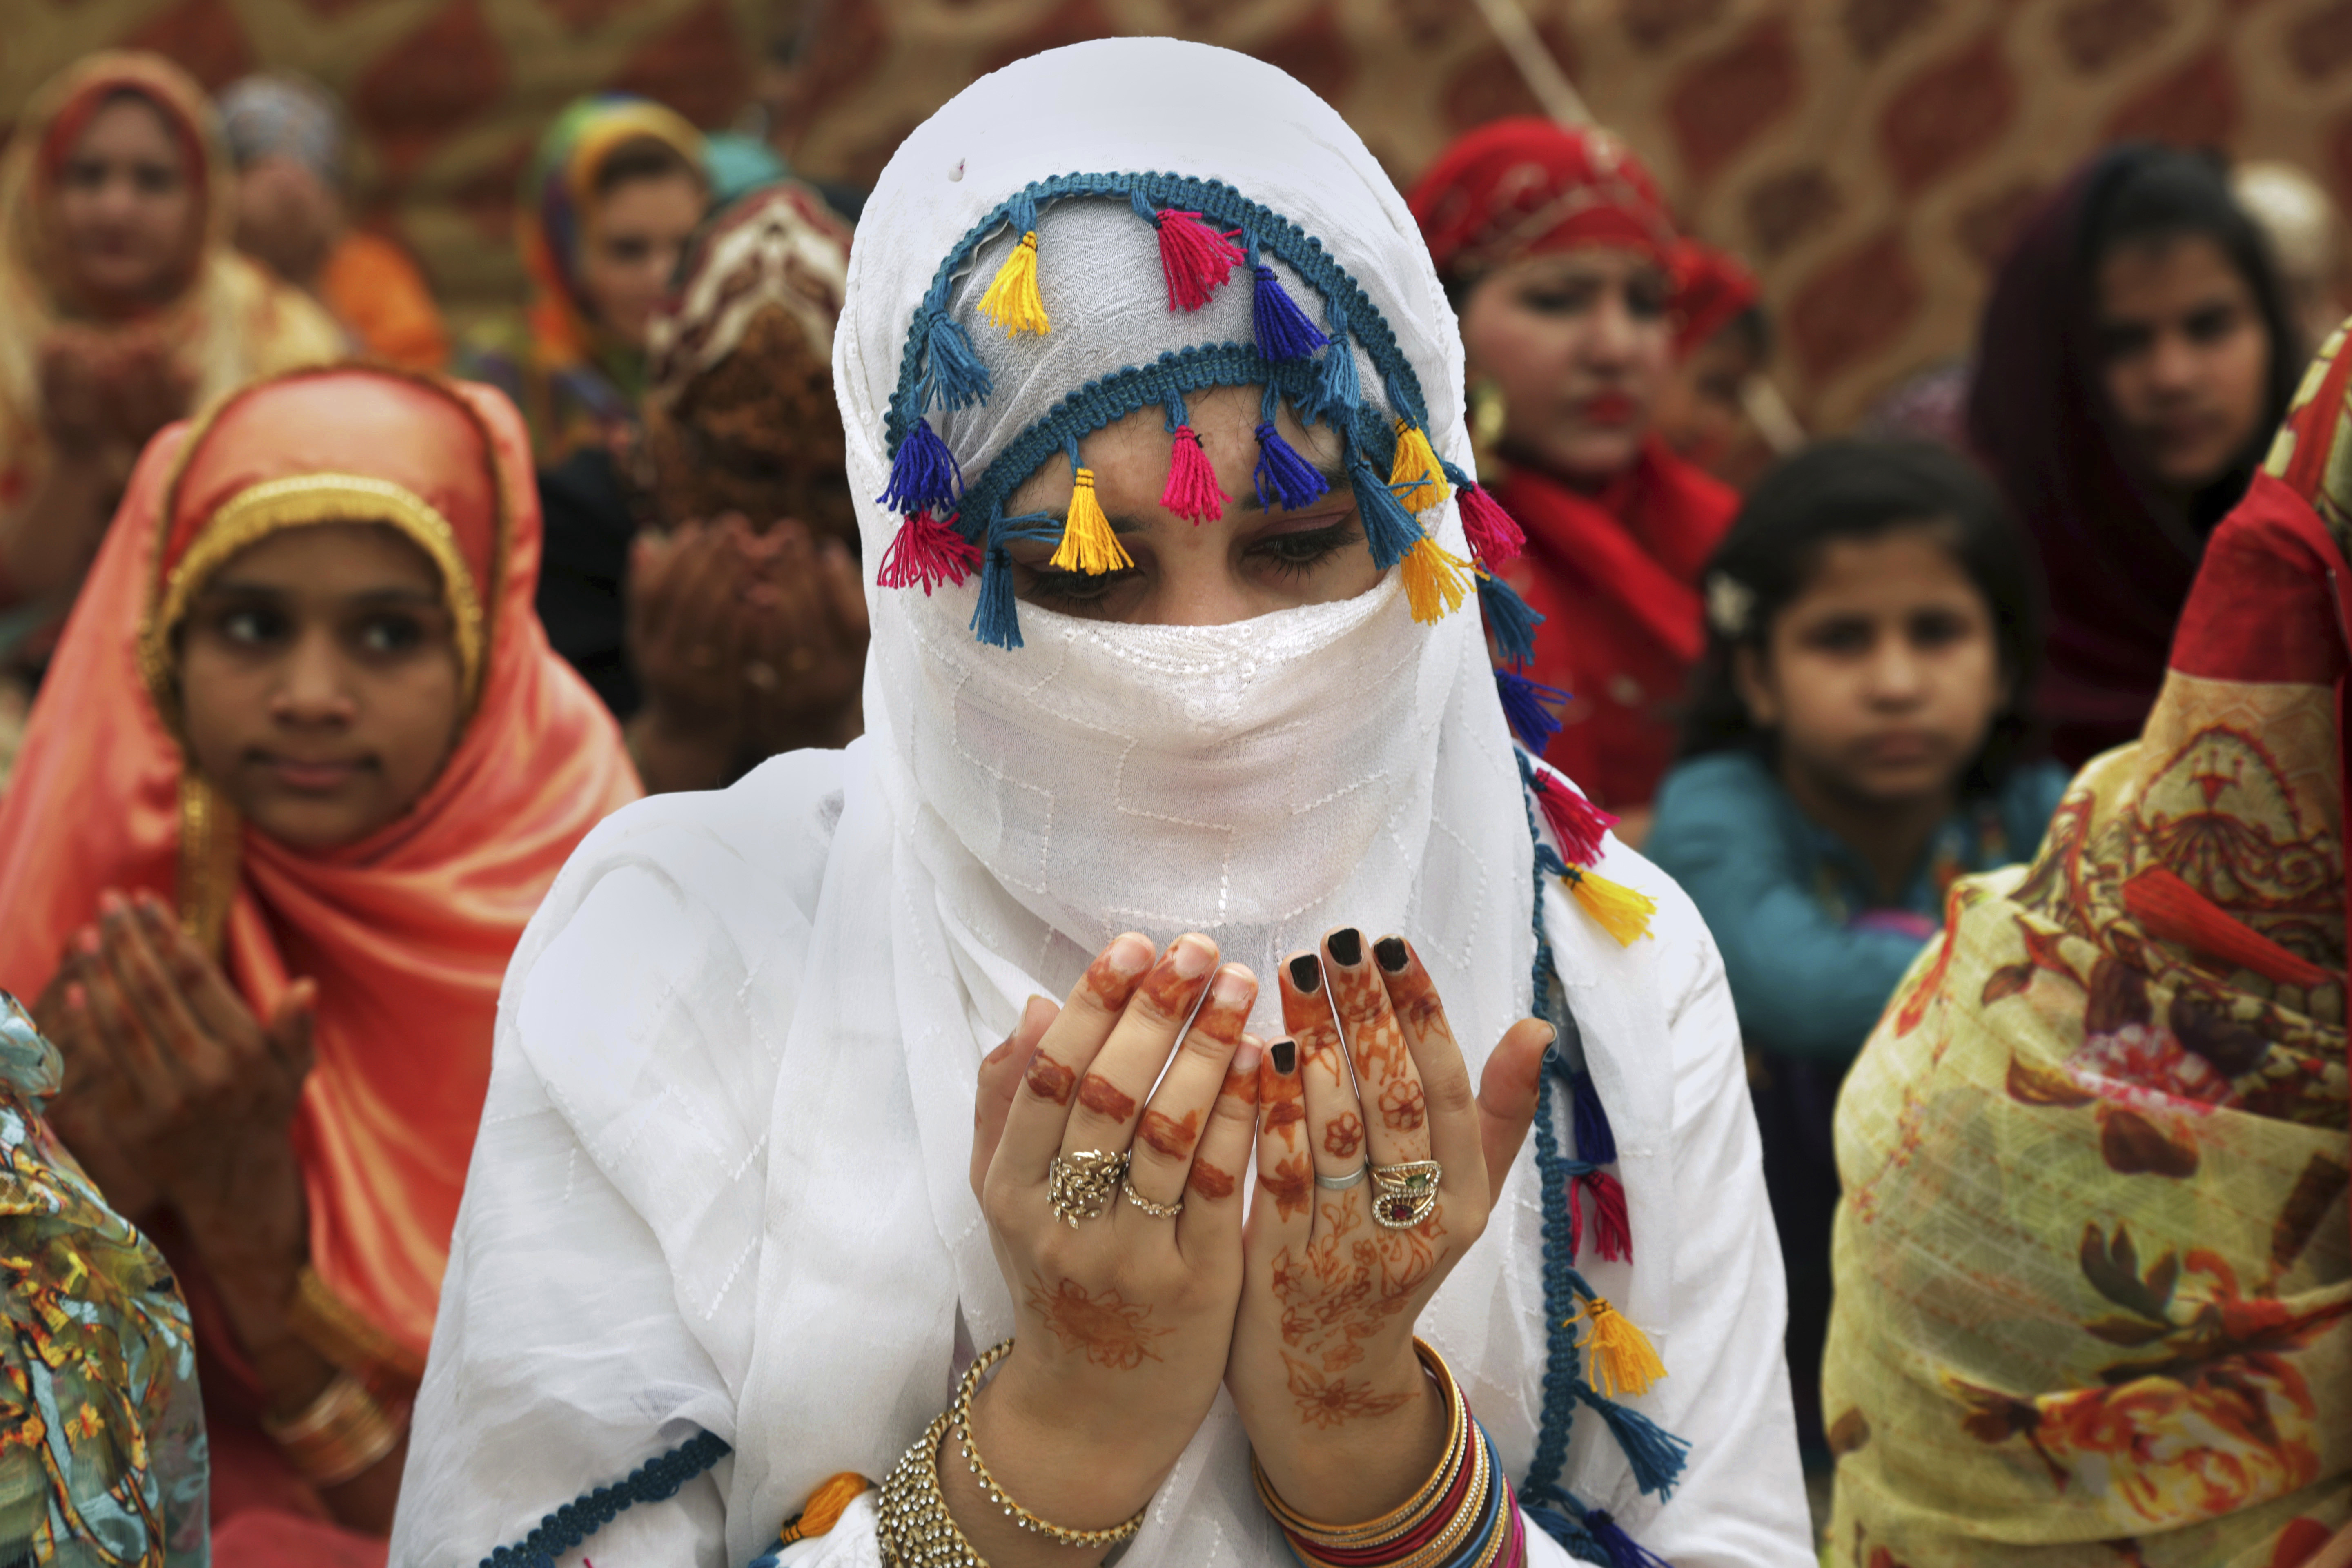 A woman prays after offering Eid al-Fitr prayers to celebrate the end of the holy month of Ramadan, at a historical Badshahi mosque in Lahore, Pakistan, Saturday, June 16, 2018. (AP Photo/K.M. Chaudary)